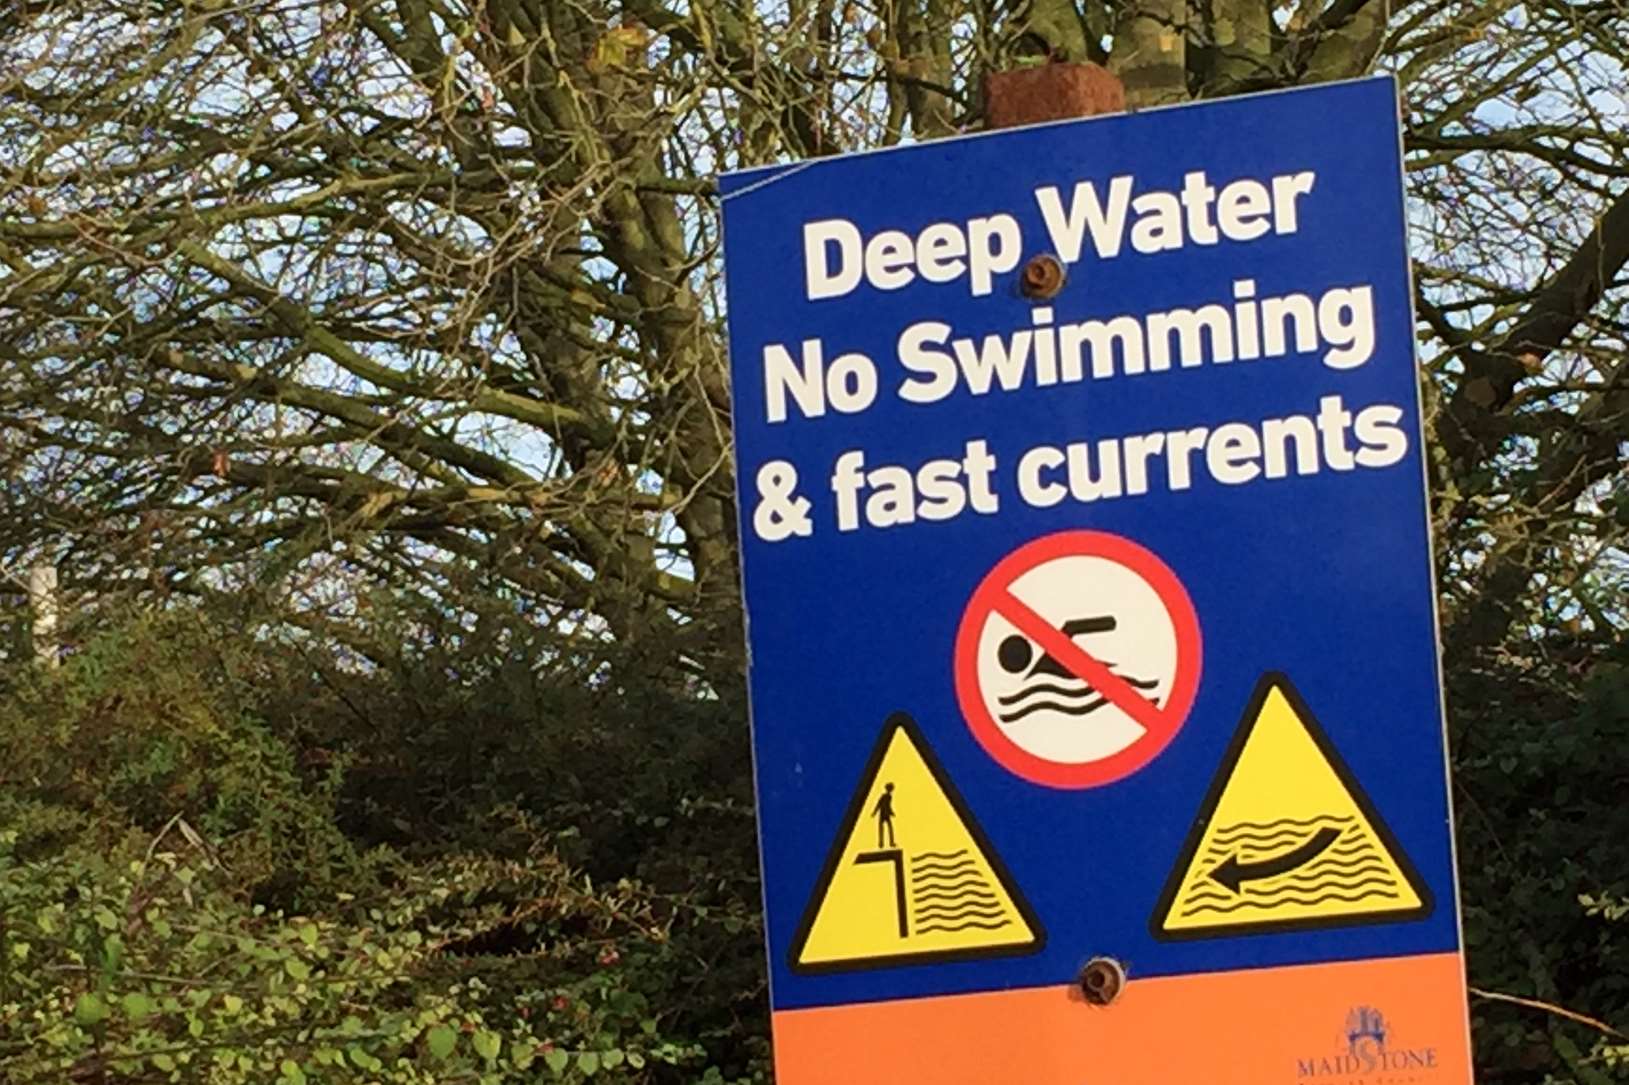 A sign warning of the dangers of entering the River Medway.